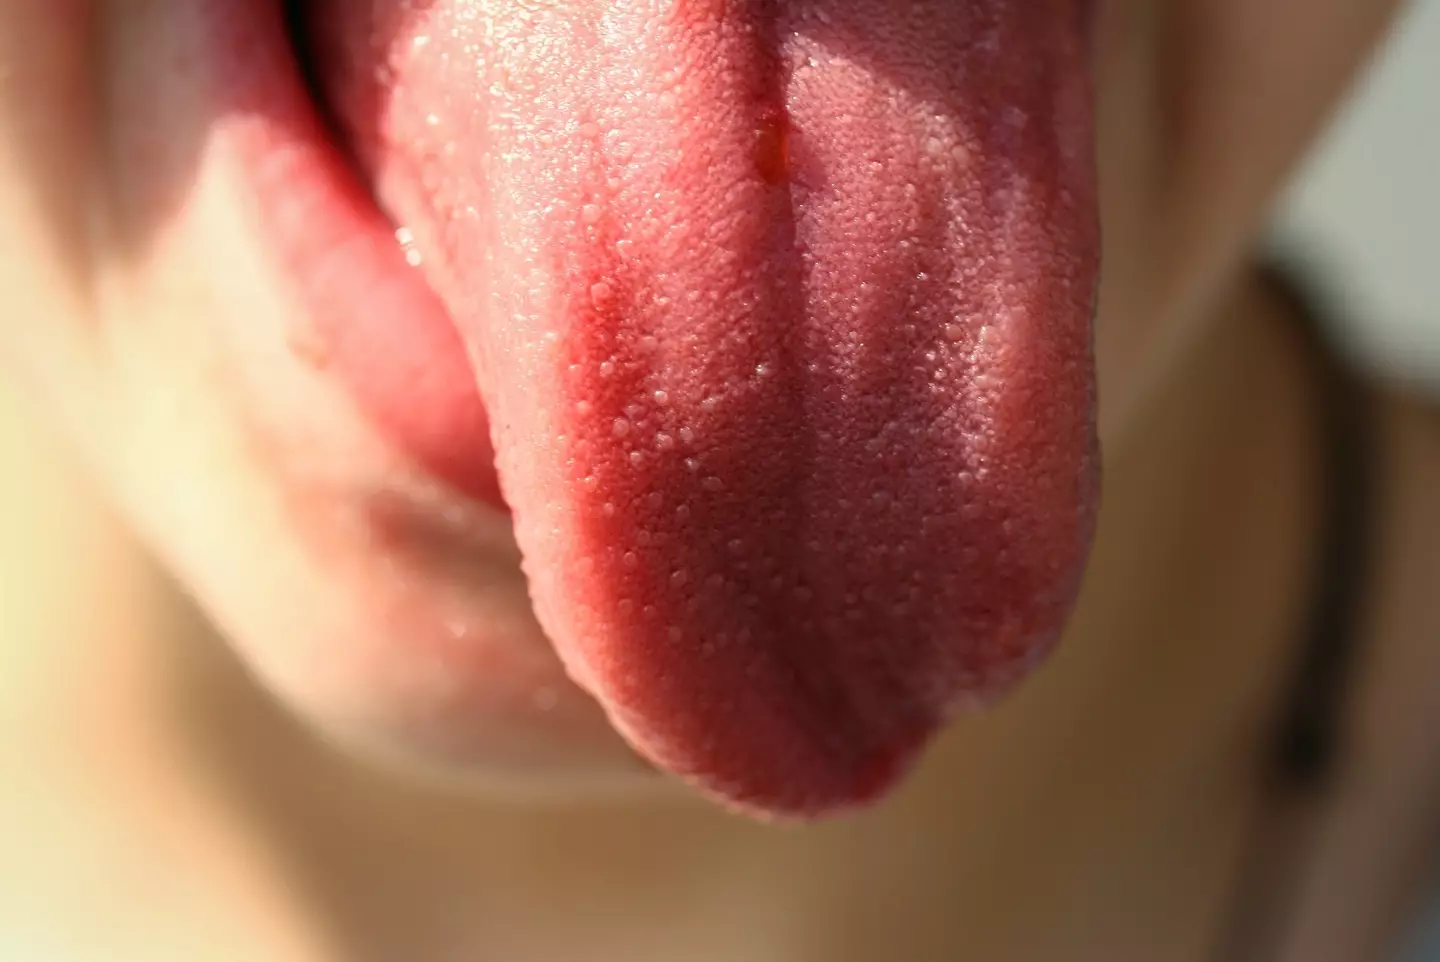 The tongue map theory has been debunked.